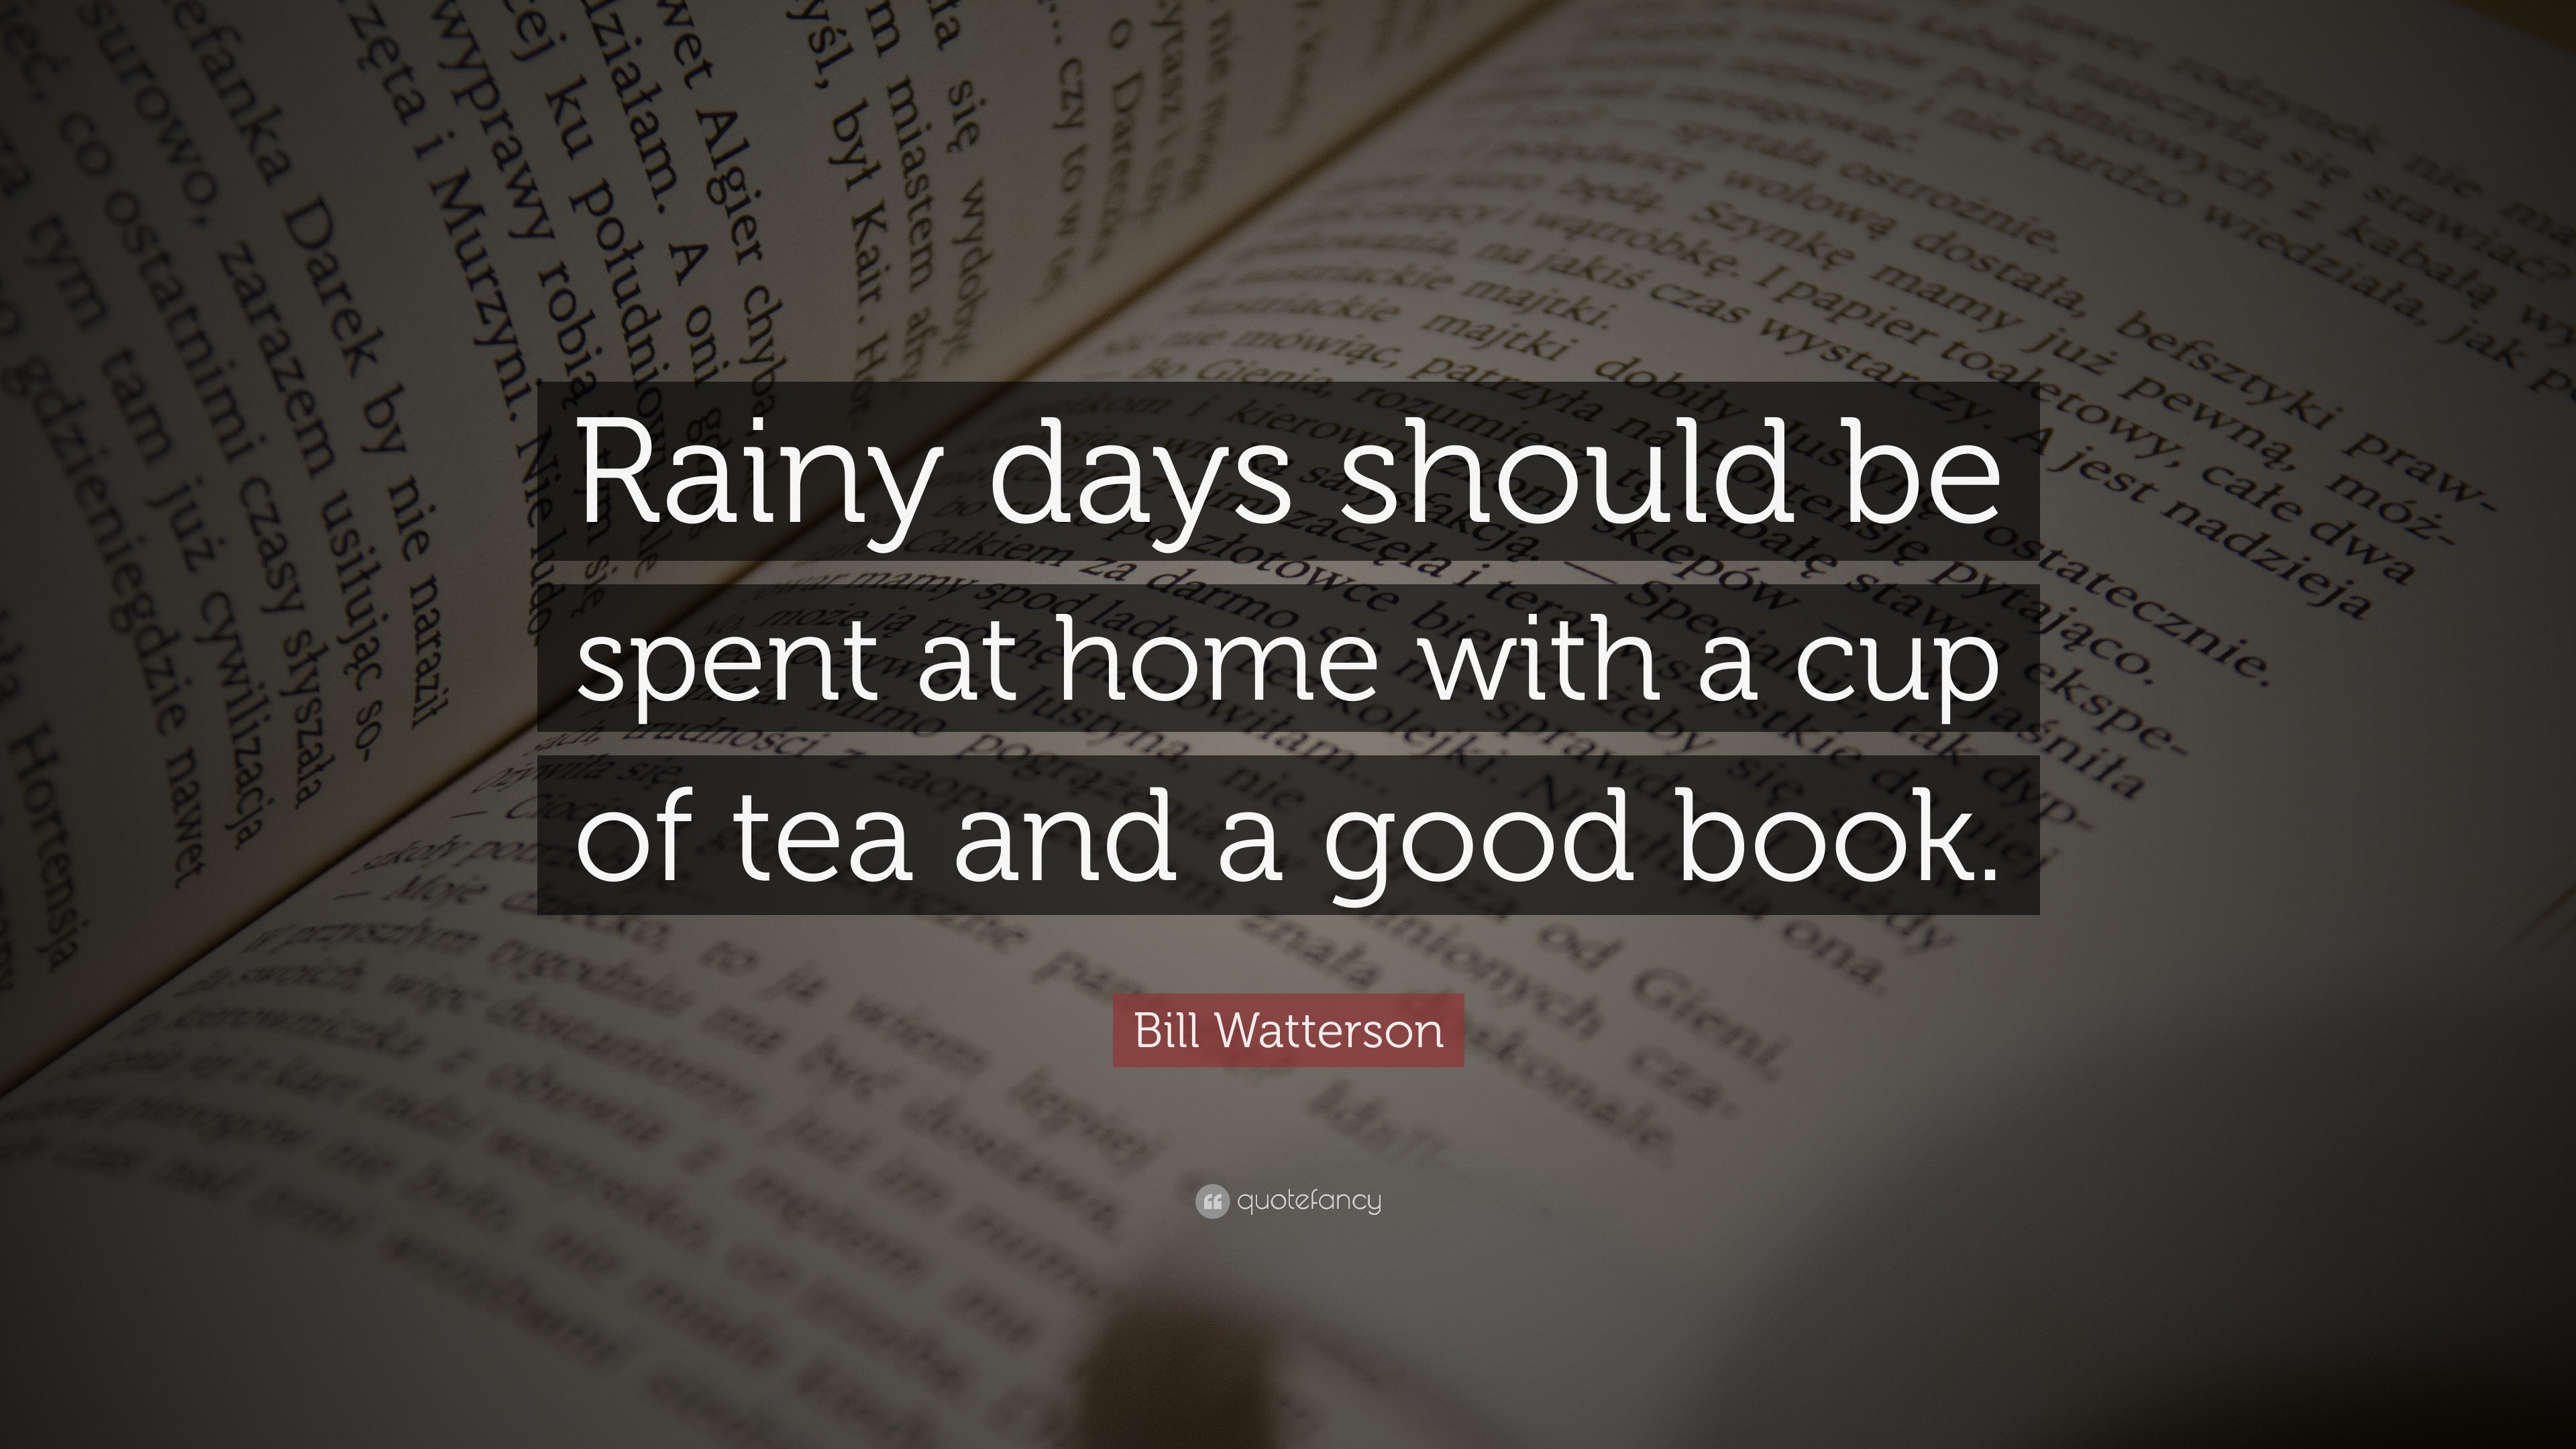 Bill Watterson Quote Rainy Days Should Be Spent At Home With A Cup Of Tea And